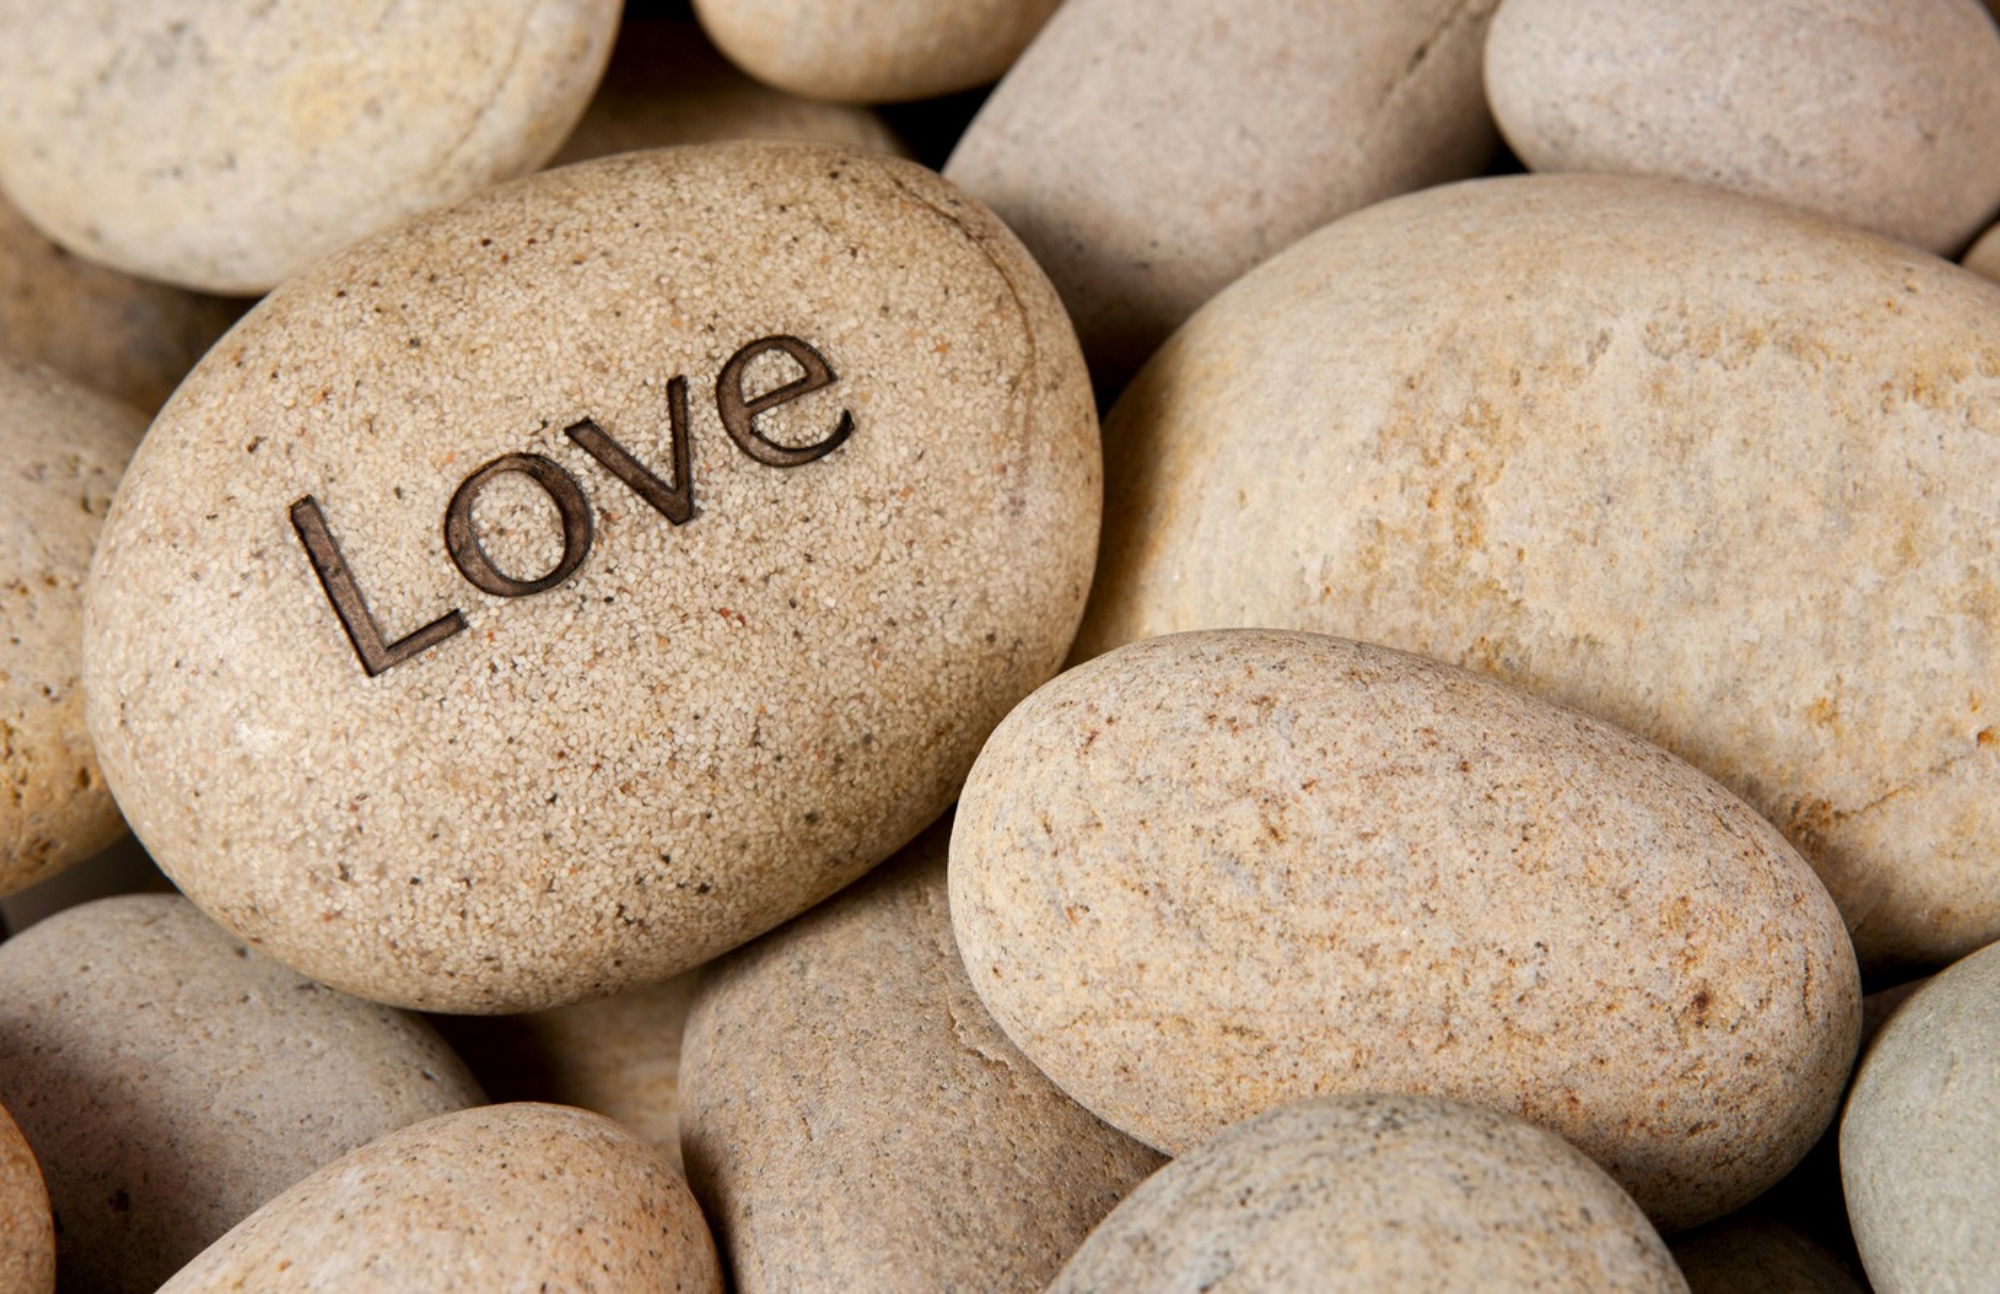 Five Powerful Love Stones - Will You Accept Them As The Source Of Your Joy?